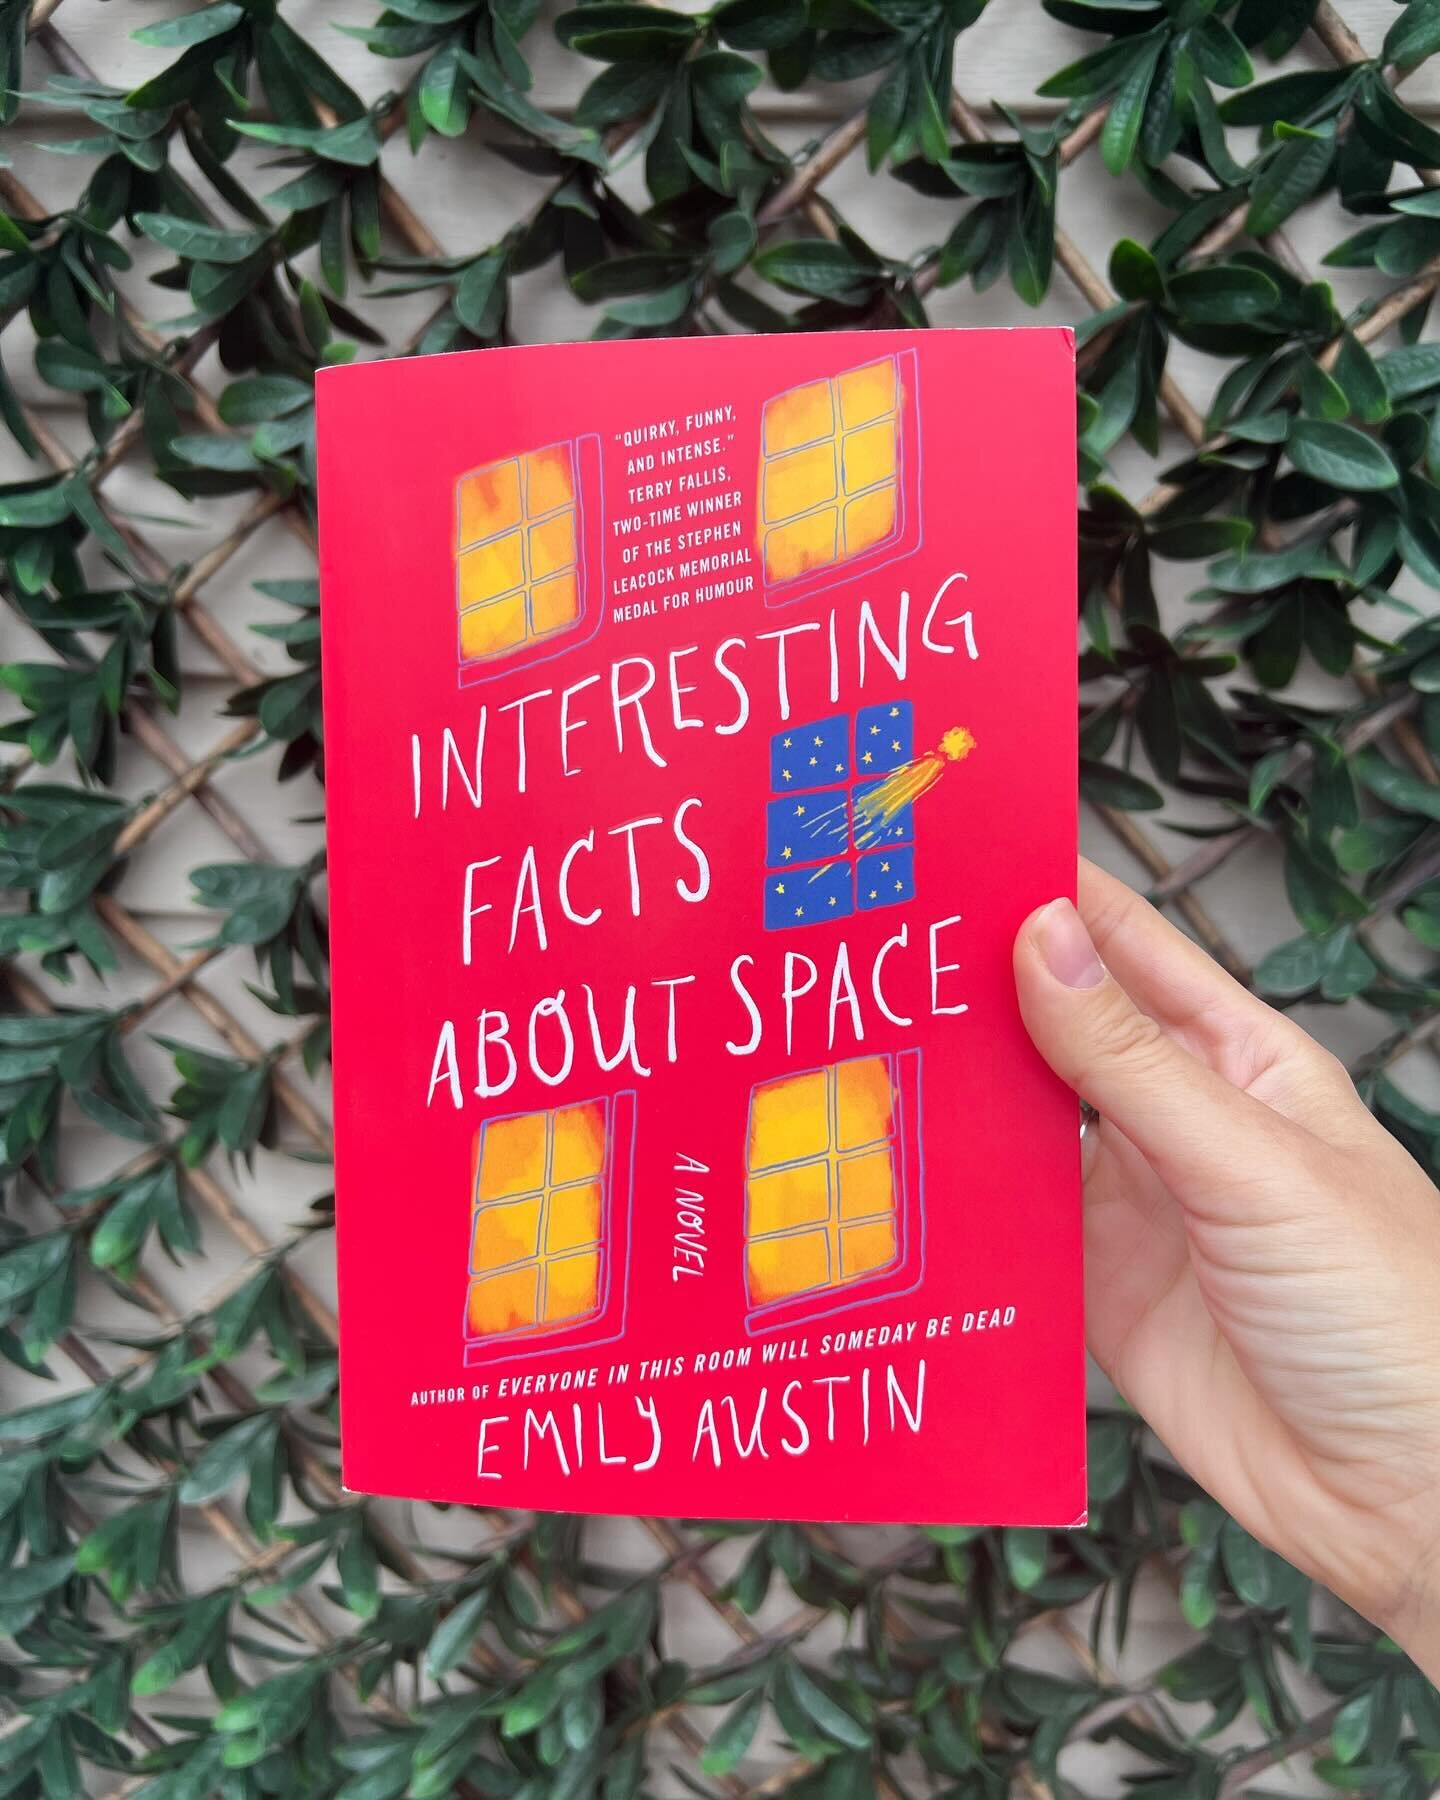 Happy pub day to Interesting Facts About Space by @emilyraustinauthor 🪐🚀 Described as a &ldquo;fast-paced, hilarious and ultimately hopefully novel for anyone who has ever worried they might be a terrible person&rdquo; (say no more - I am already o